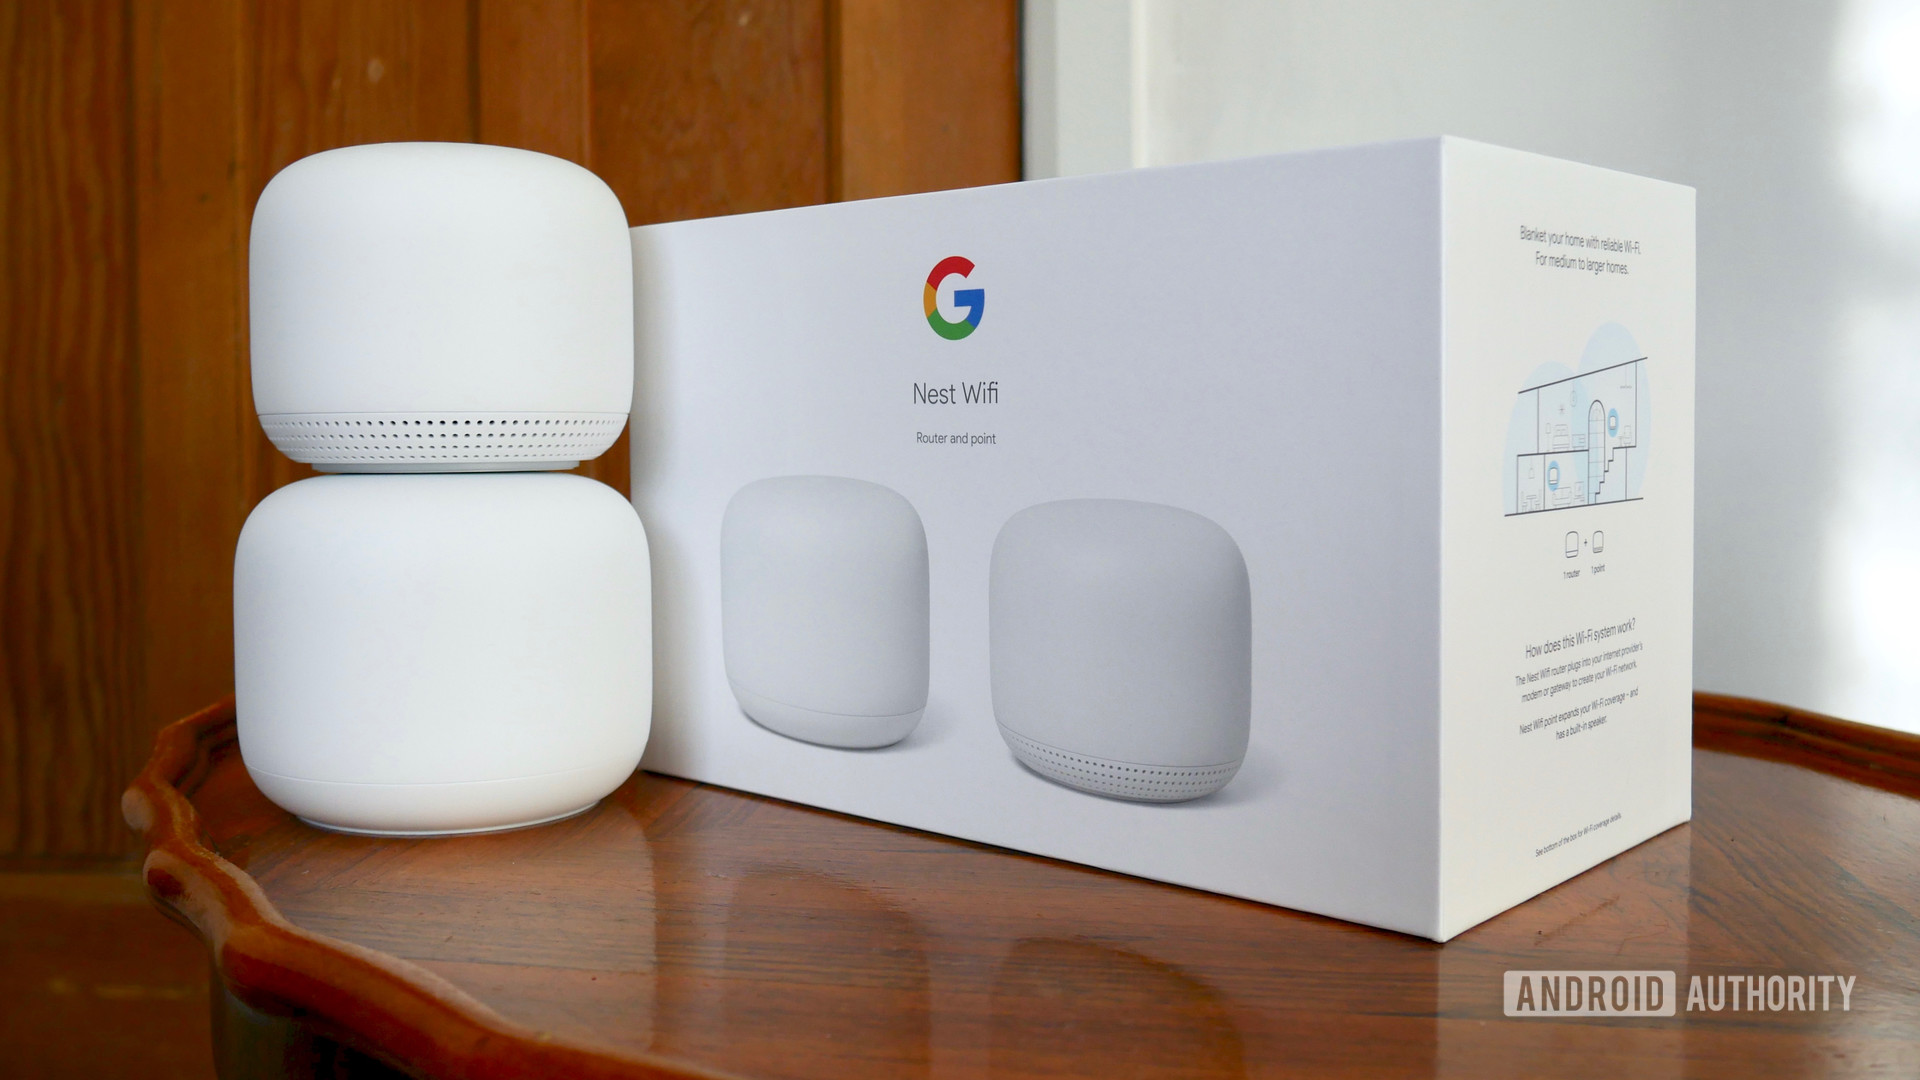 Locate your Google Home Mini and your Wi-Fi router.
Move your Google Home Mini closer to your Wi-Fi router, ensuring they are within a reasonable distance.